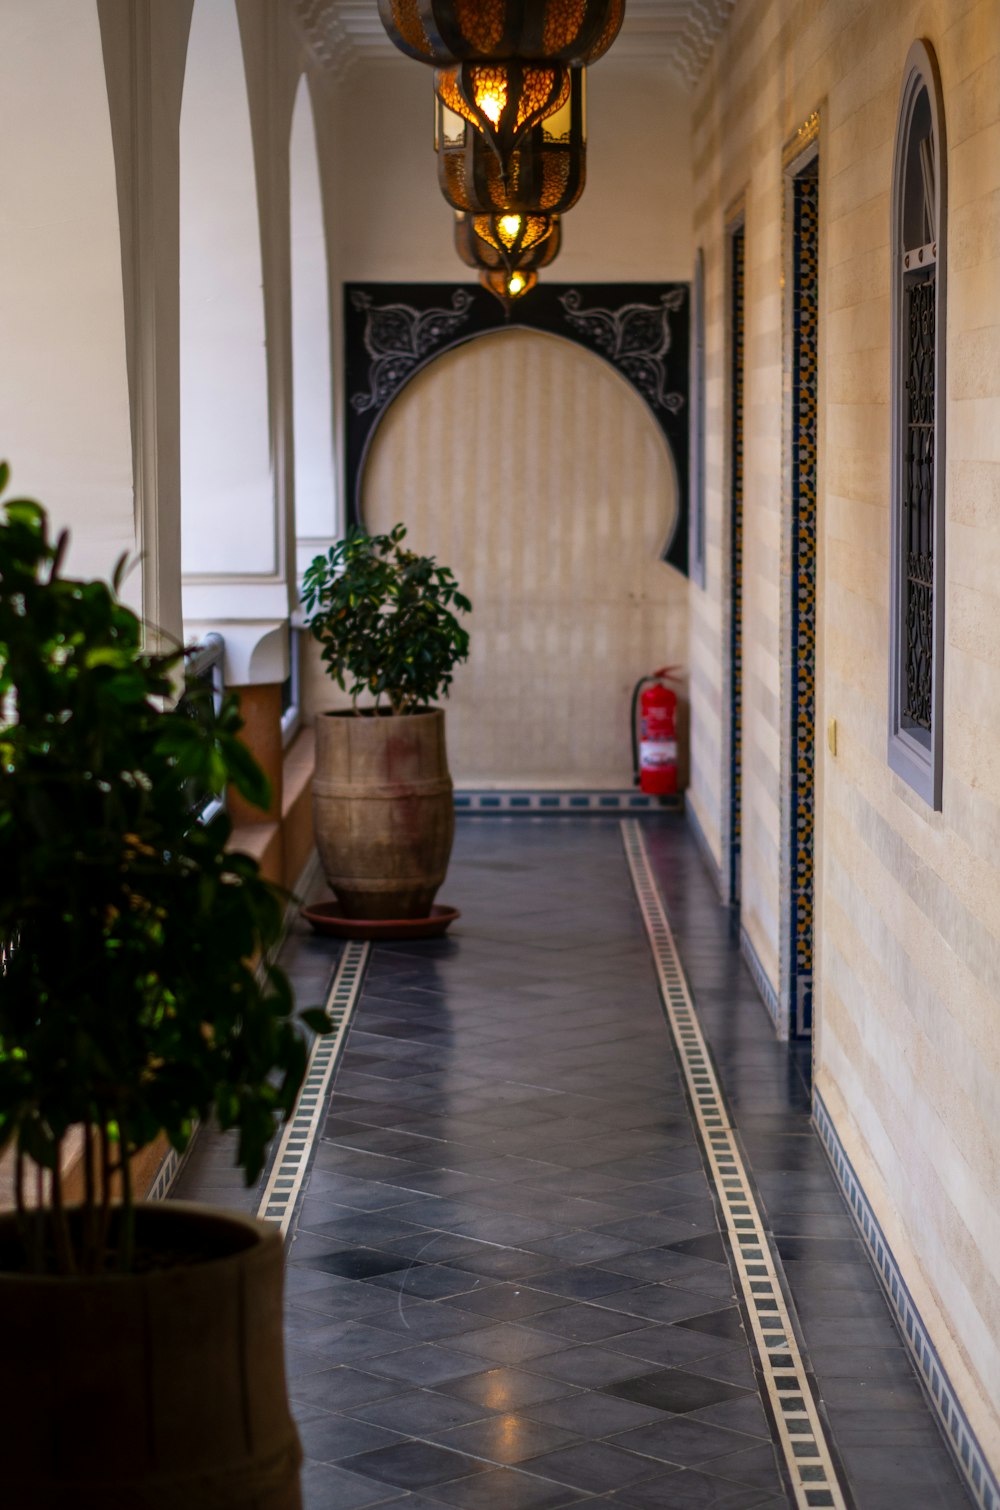 a hallway with a potted plant and a light hanging from the ceiling